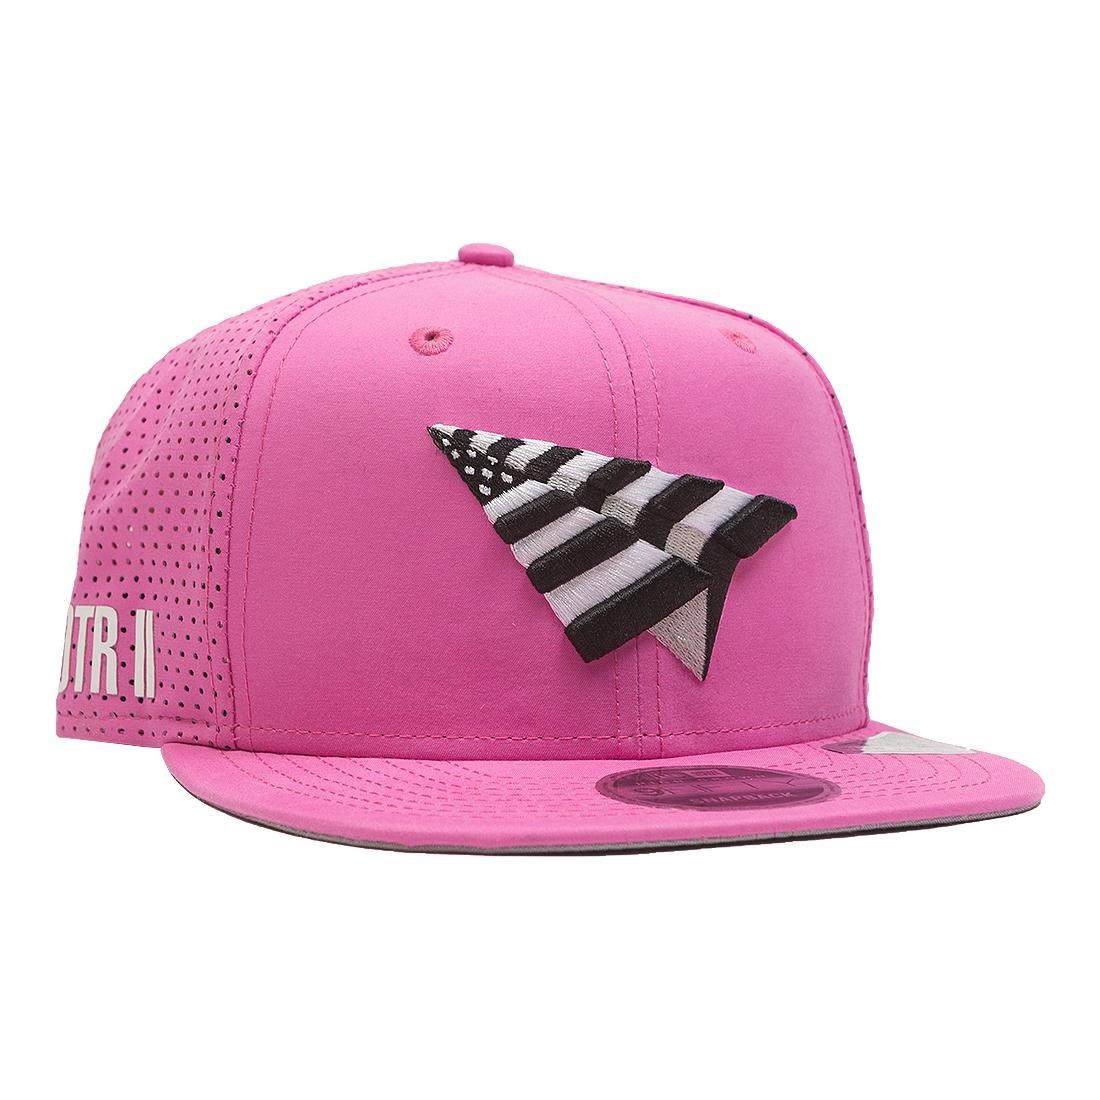 Paper Planes The Crown 2 Snapback Cap pink